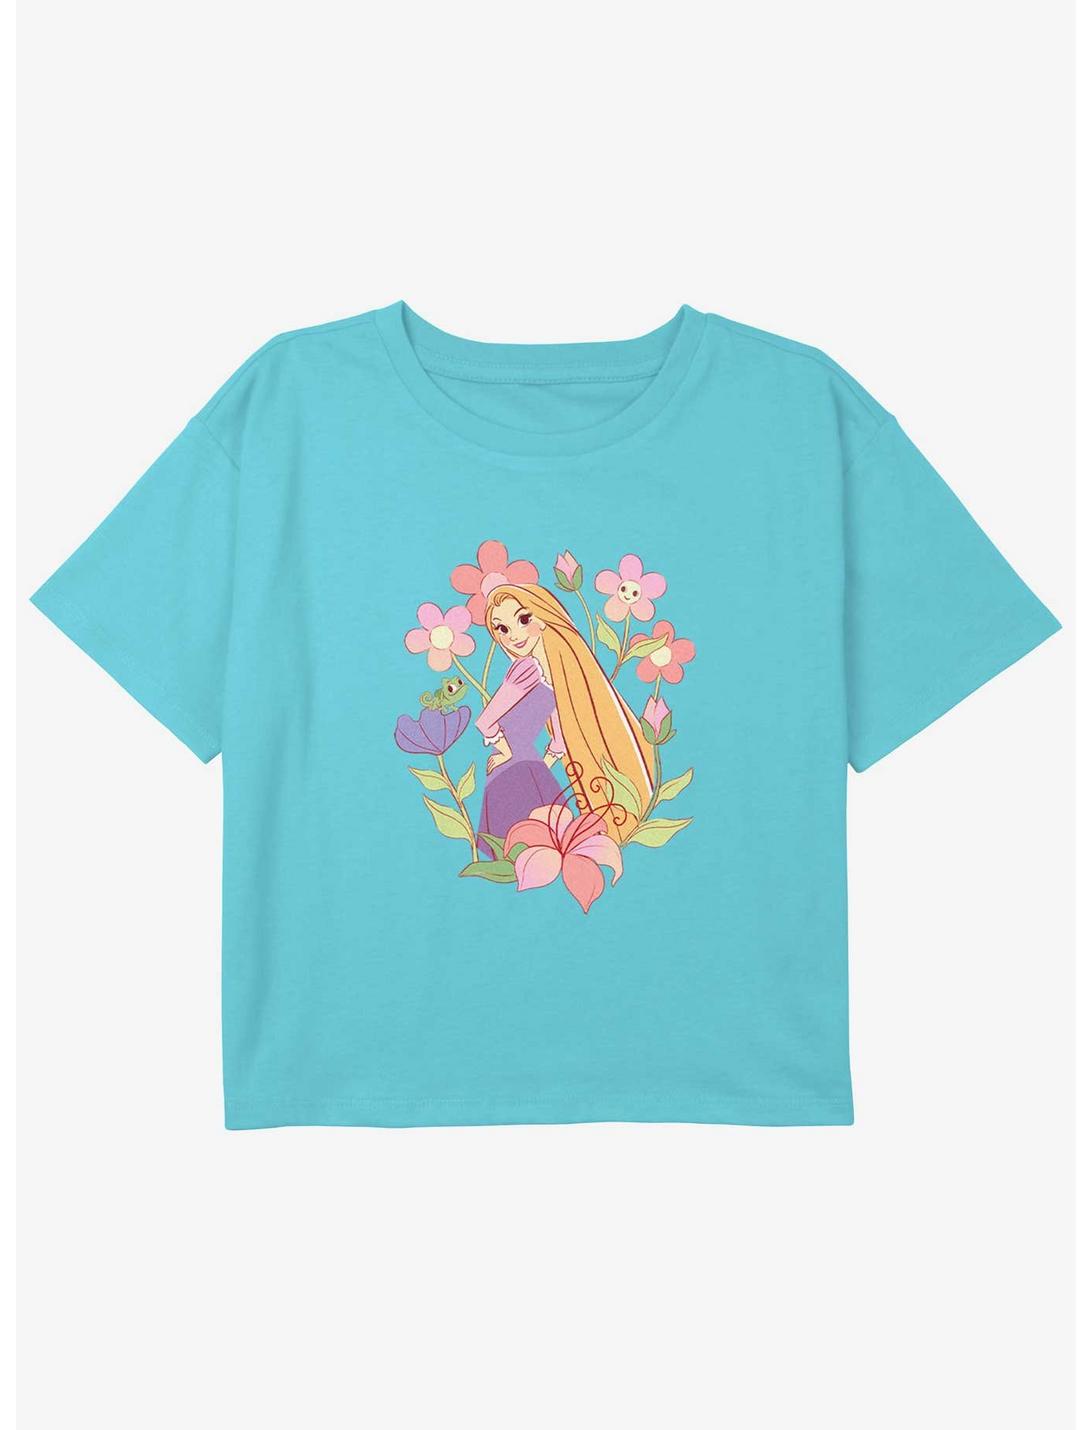 Disney Tangled Rapunzel And Pascal With Flowers Girls Youth Crop T-Shirt, BLUE, hi-res